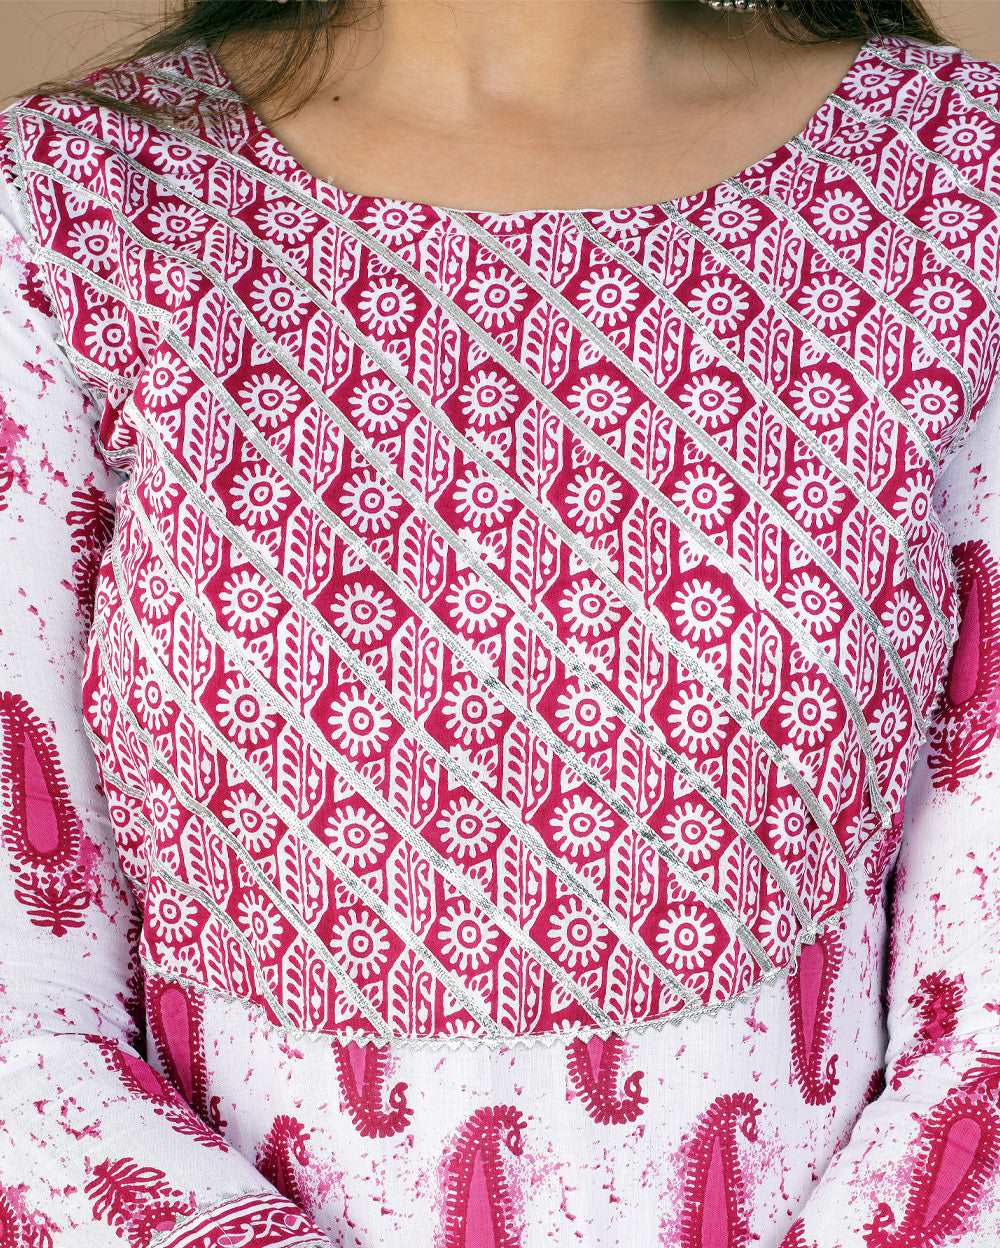 Pink Buti Printed Cotton Suit Set With Gota Work On Neck and Dupatta